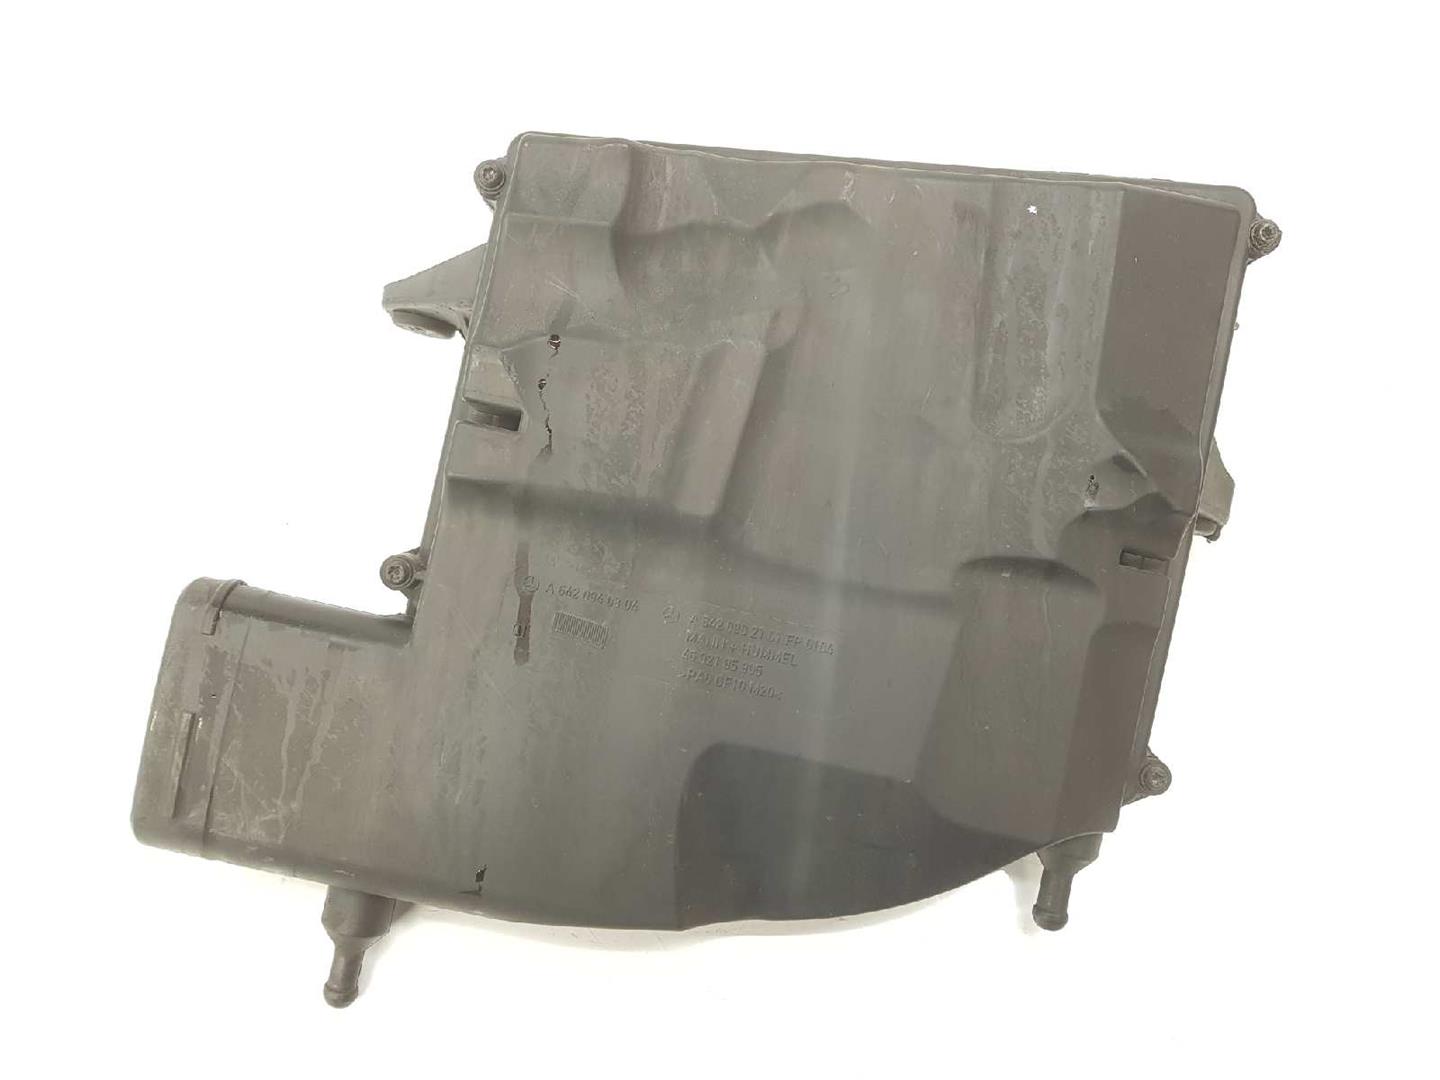 MERCEDES-BENZ M-Class W164 (2005-2011) Other Engine Compartment Parts A6420902101, A6420902101 19743320